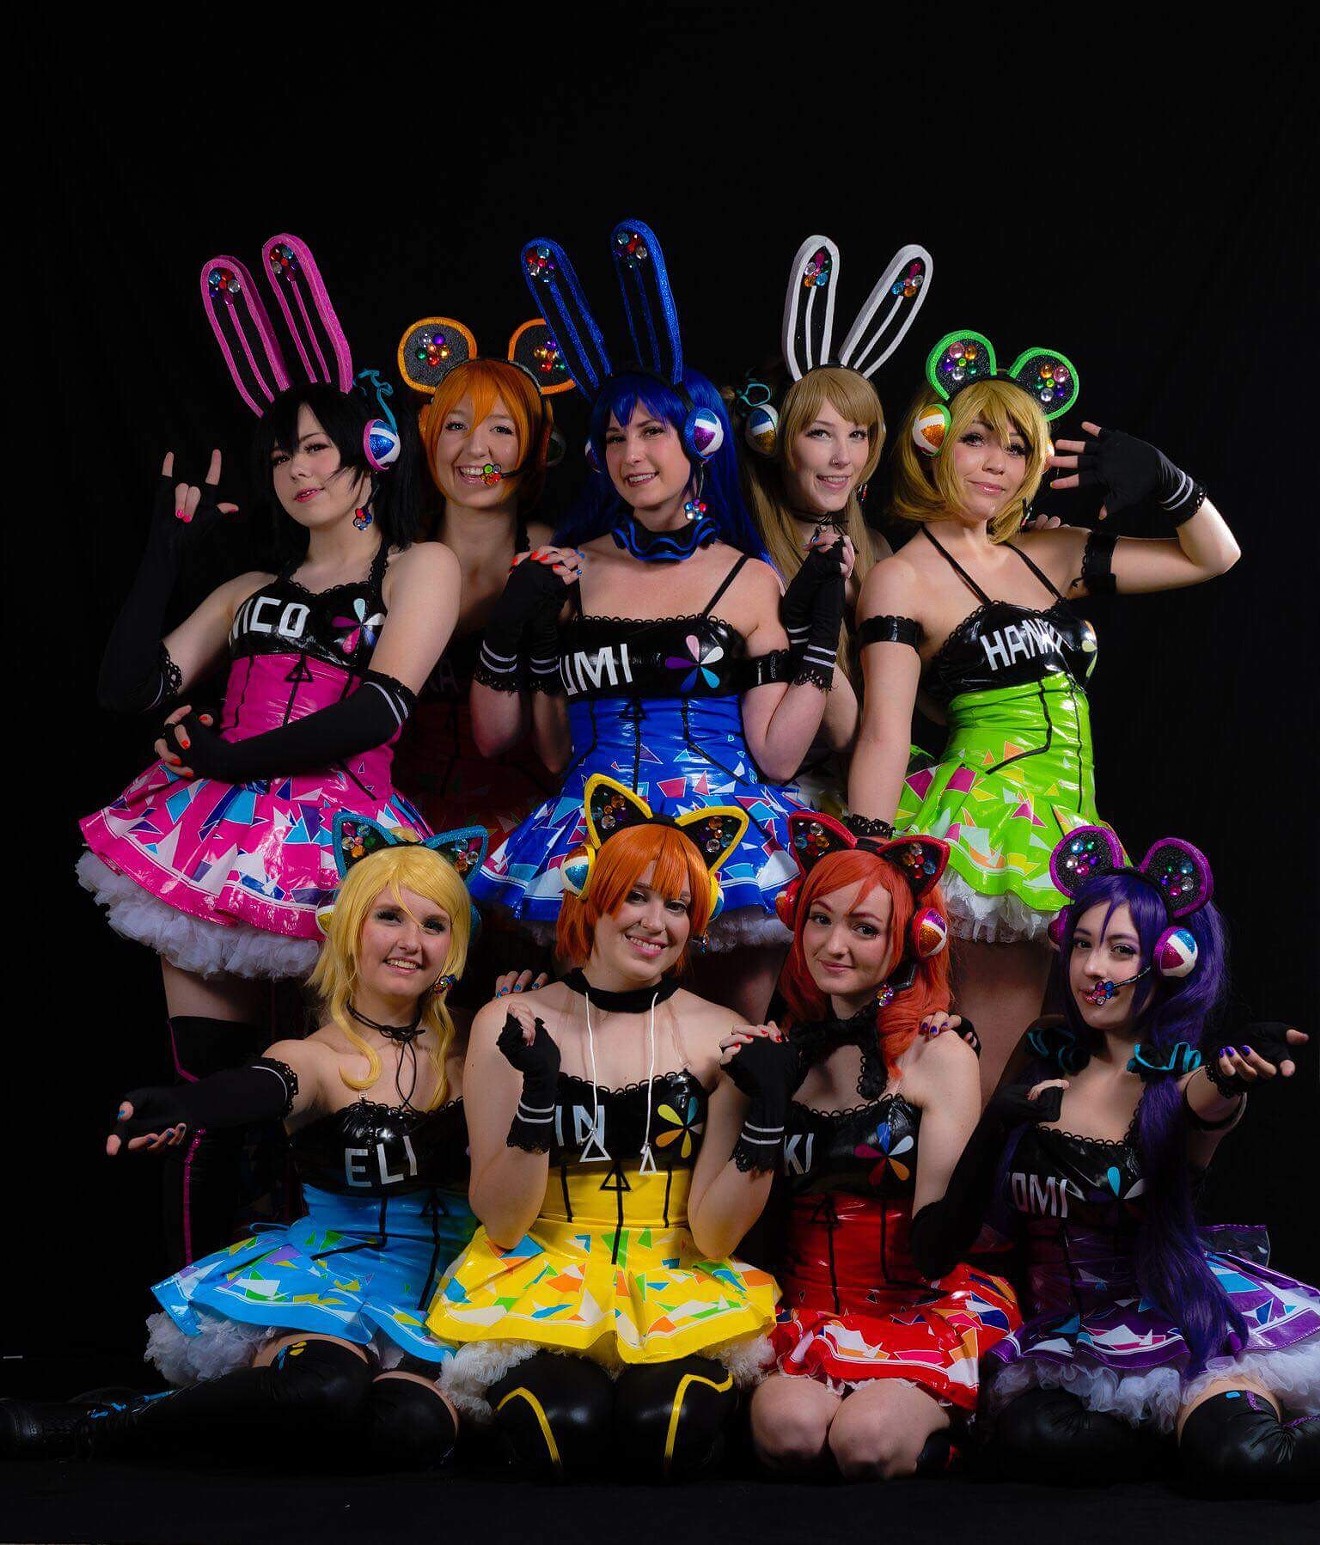 Project: StarLight is a cosplay dance group.